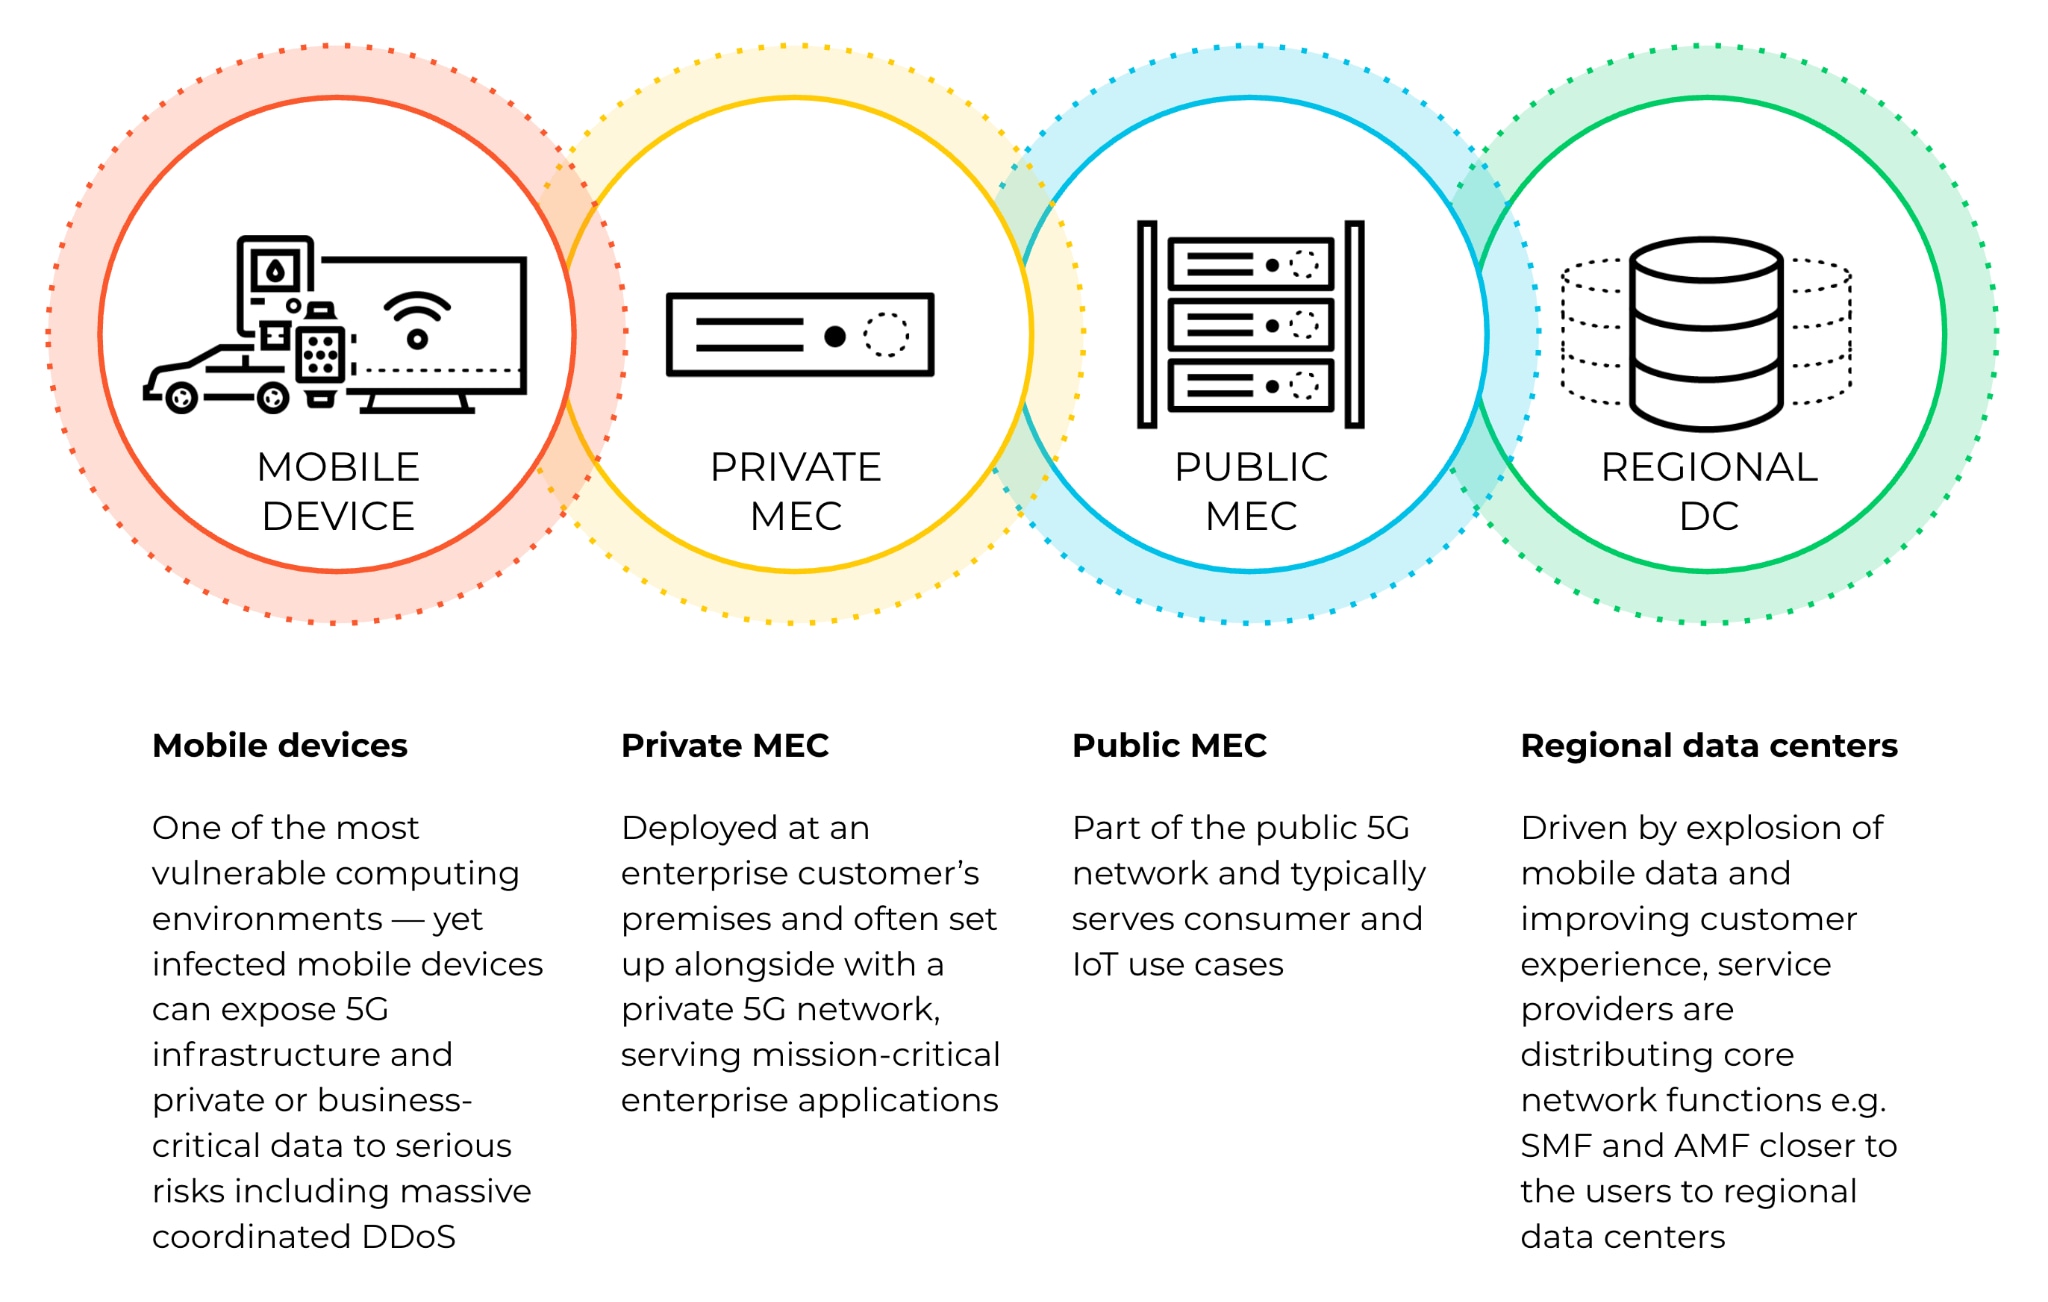 Mobile edge, including Multi-access Edge Computing (MEC), requires a new approach to cybersecurity. Effective 5G edge security is best achieved through a platform approach that combines four types of edge environments.